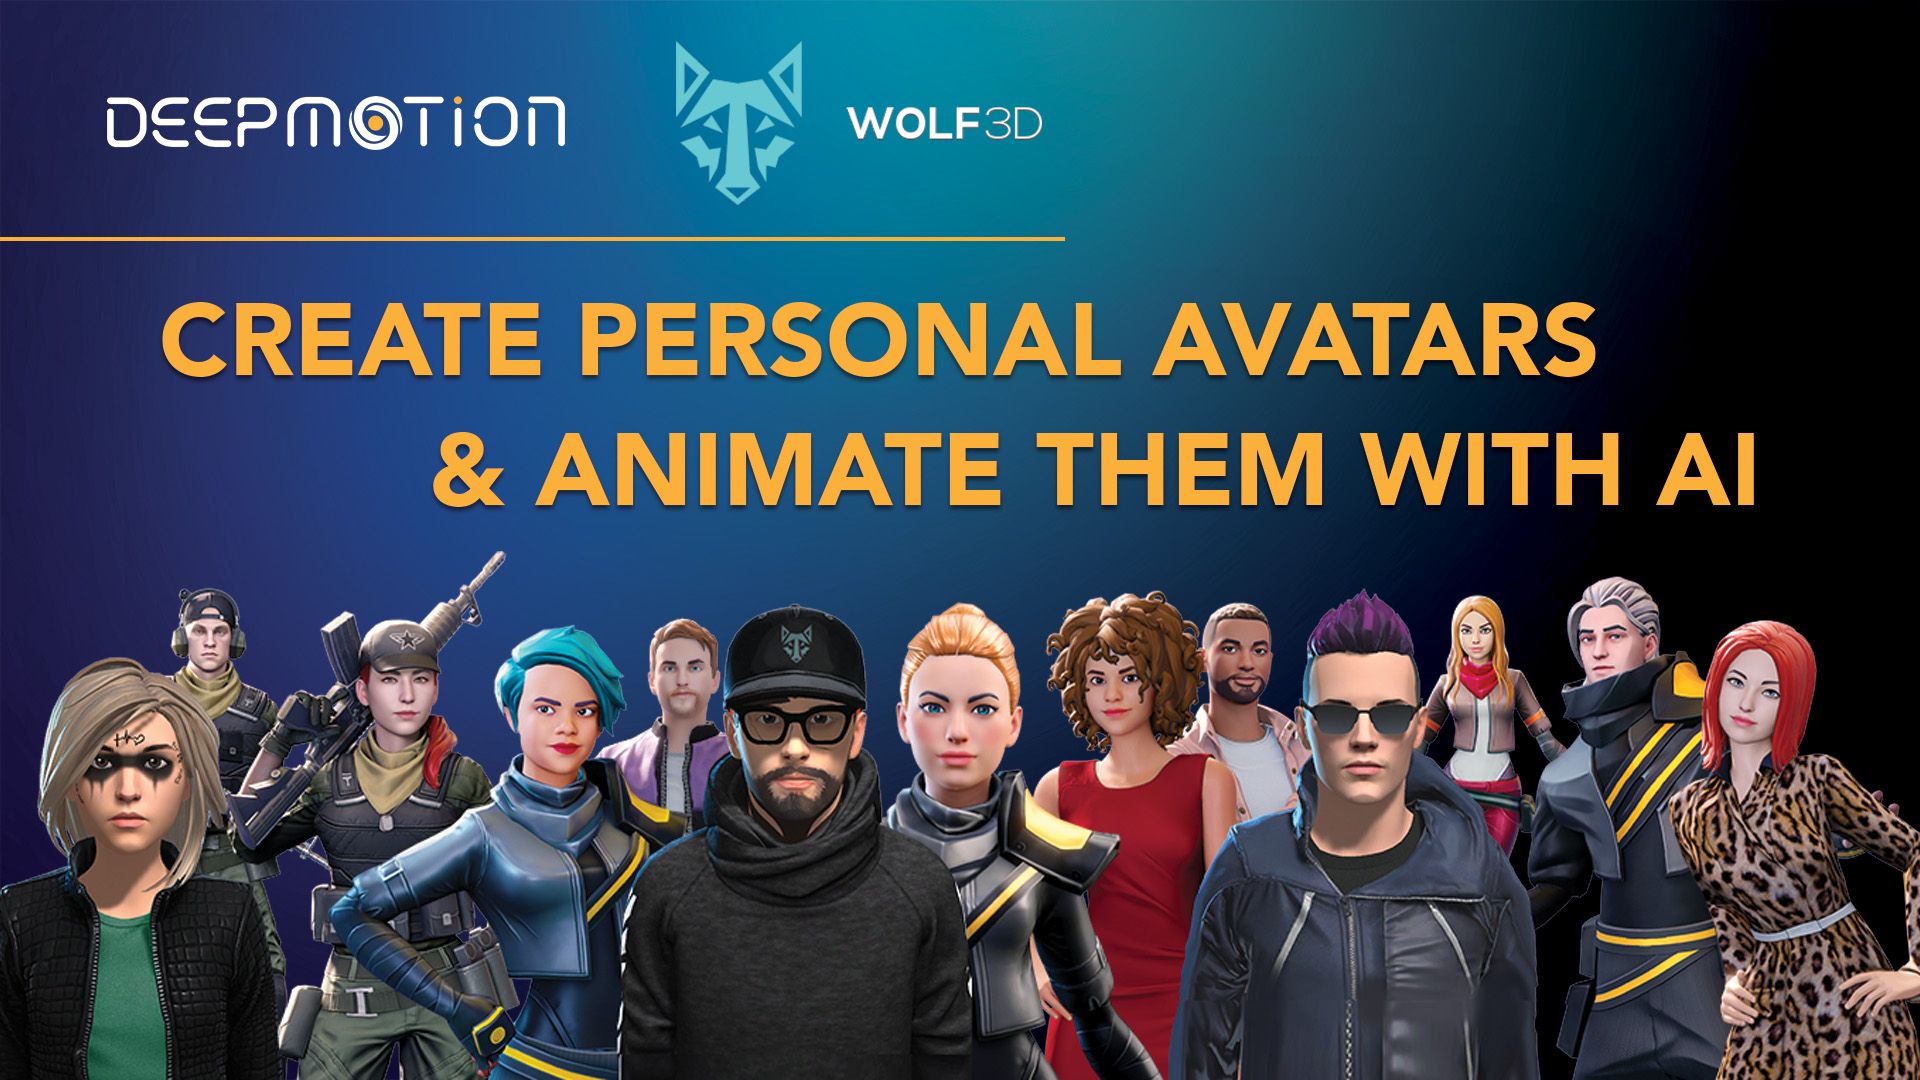 DeepMotion + Wolf3D: Create Personal Avatars & Animate Them With AI